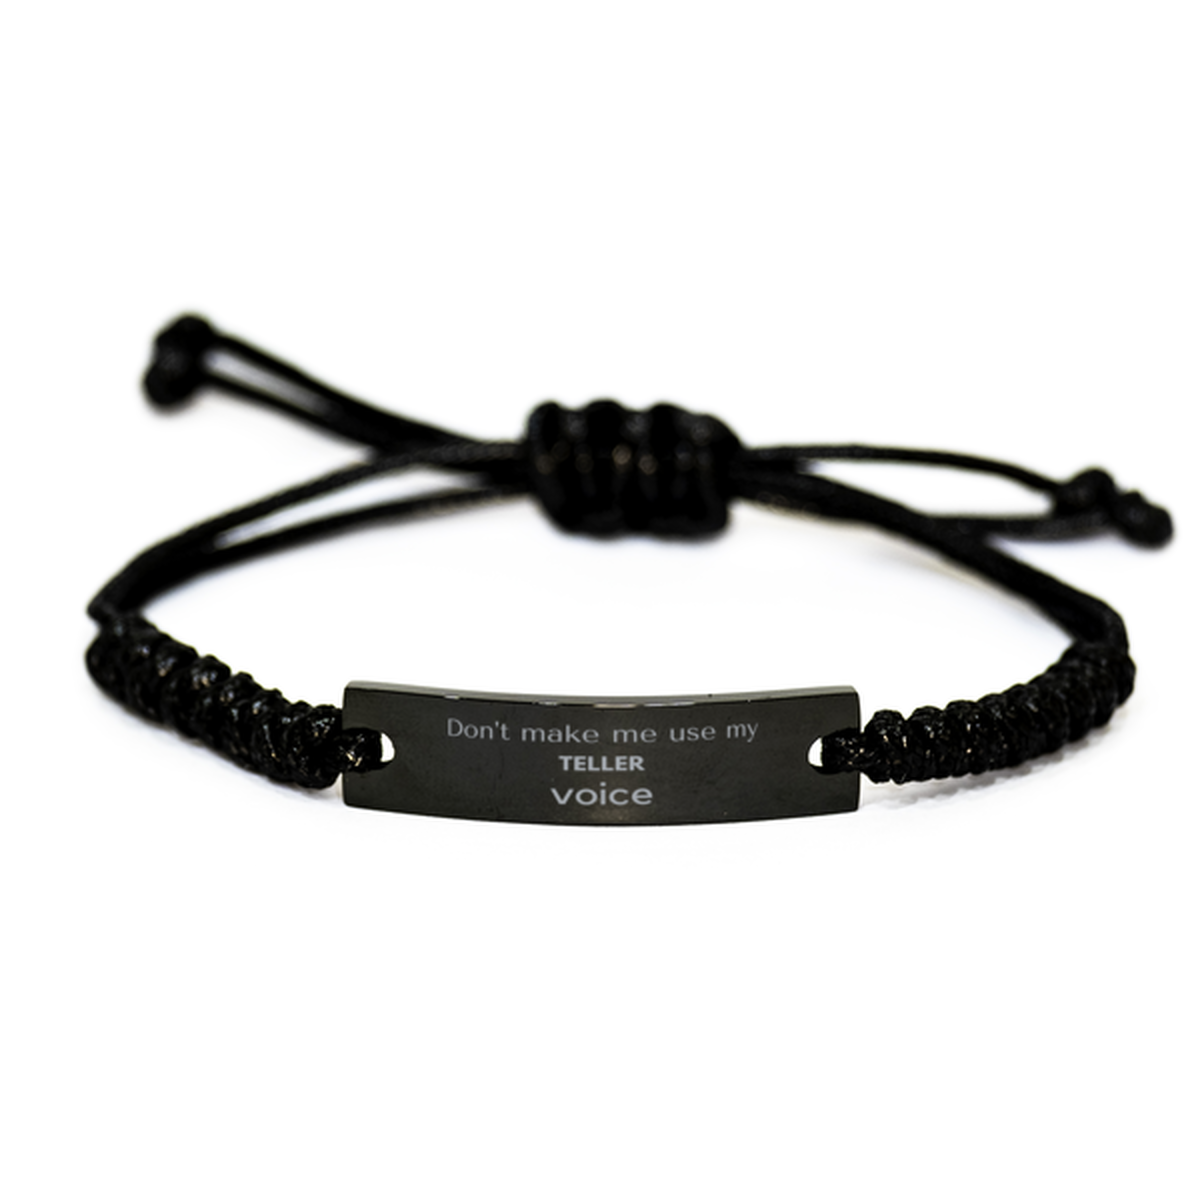 Don't make me use my Teller voice, Sarcasm Teller Gifts, Christmas Teller Black Rope Bracelet Birthday Unique Gifts For Teller Coworkers, Men, Women, Colleague, Friends